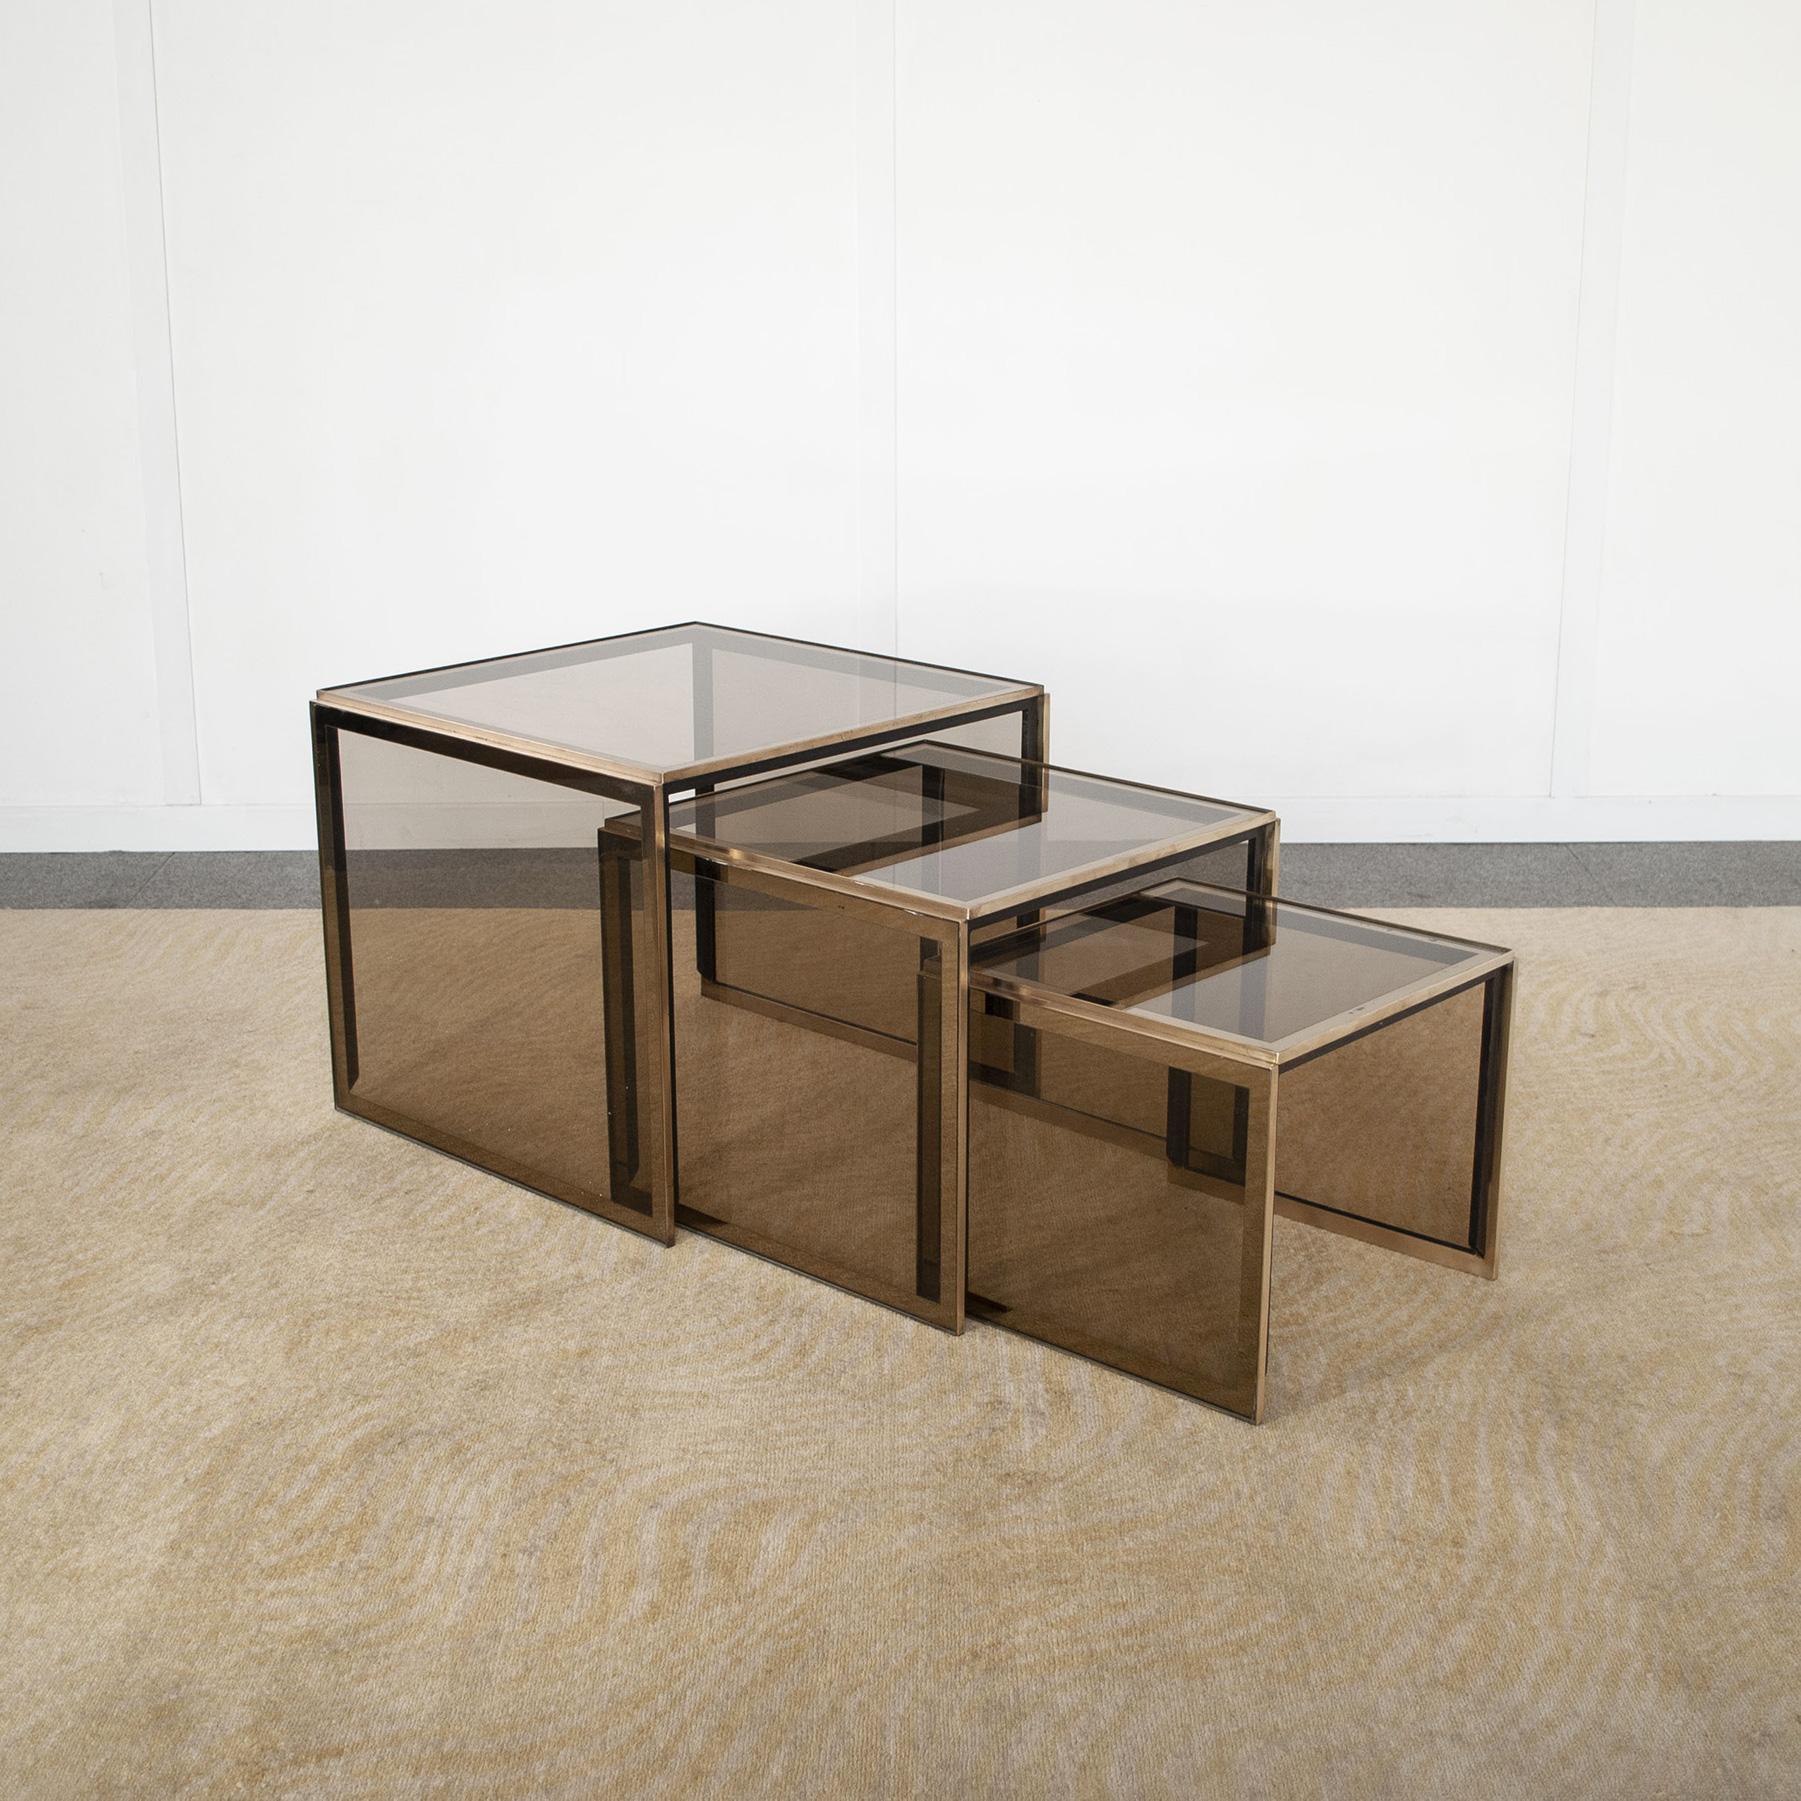 Tris of so called nesting tables designer Renato Zevi in brass and smoked glass production late 1970s.